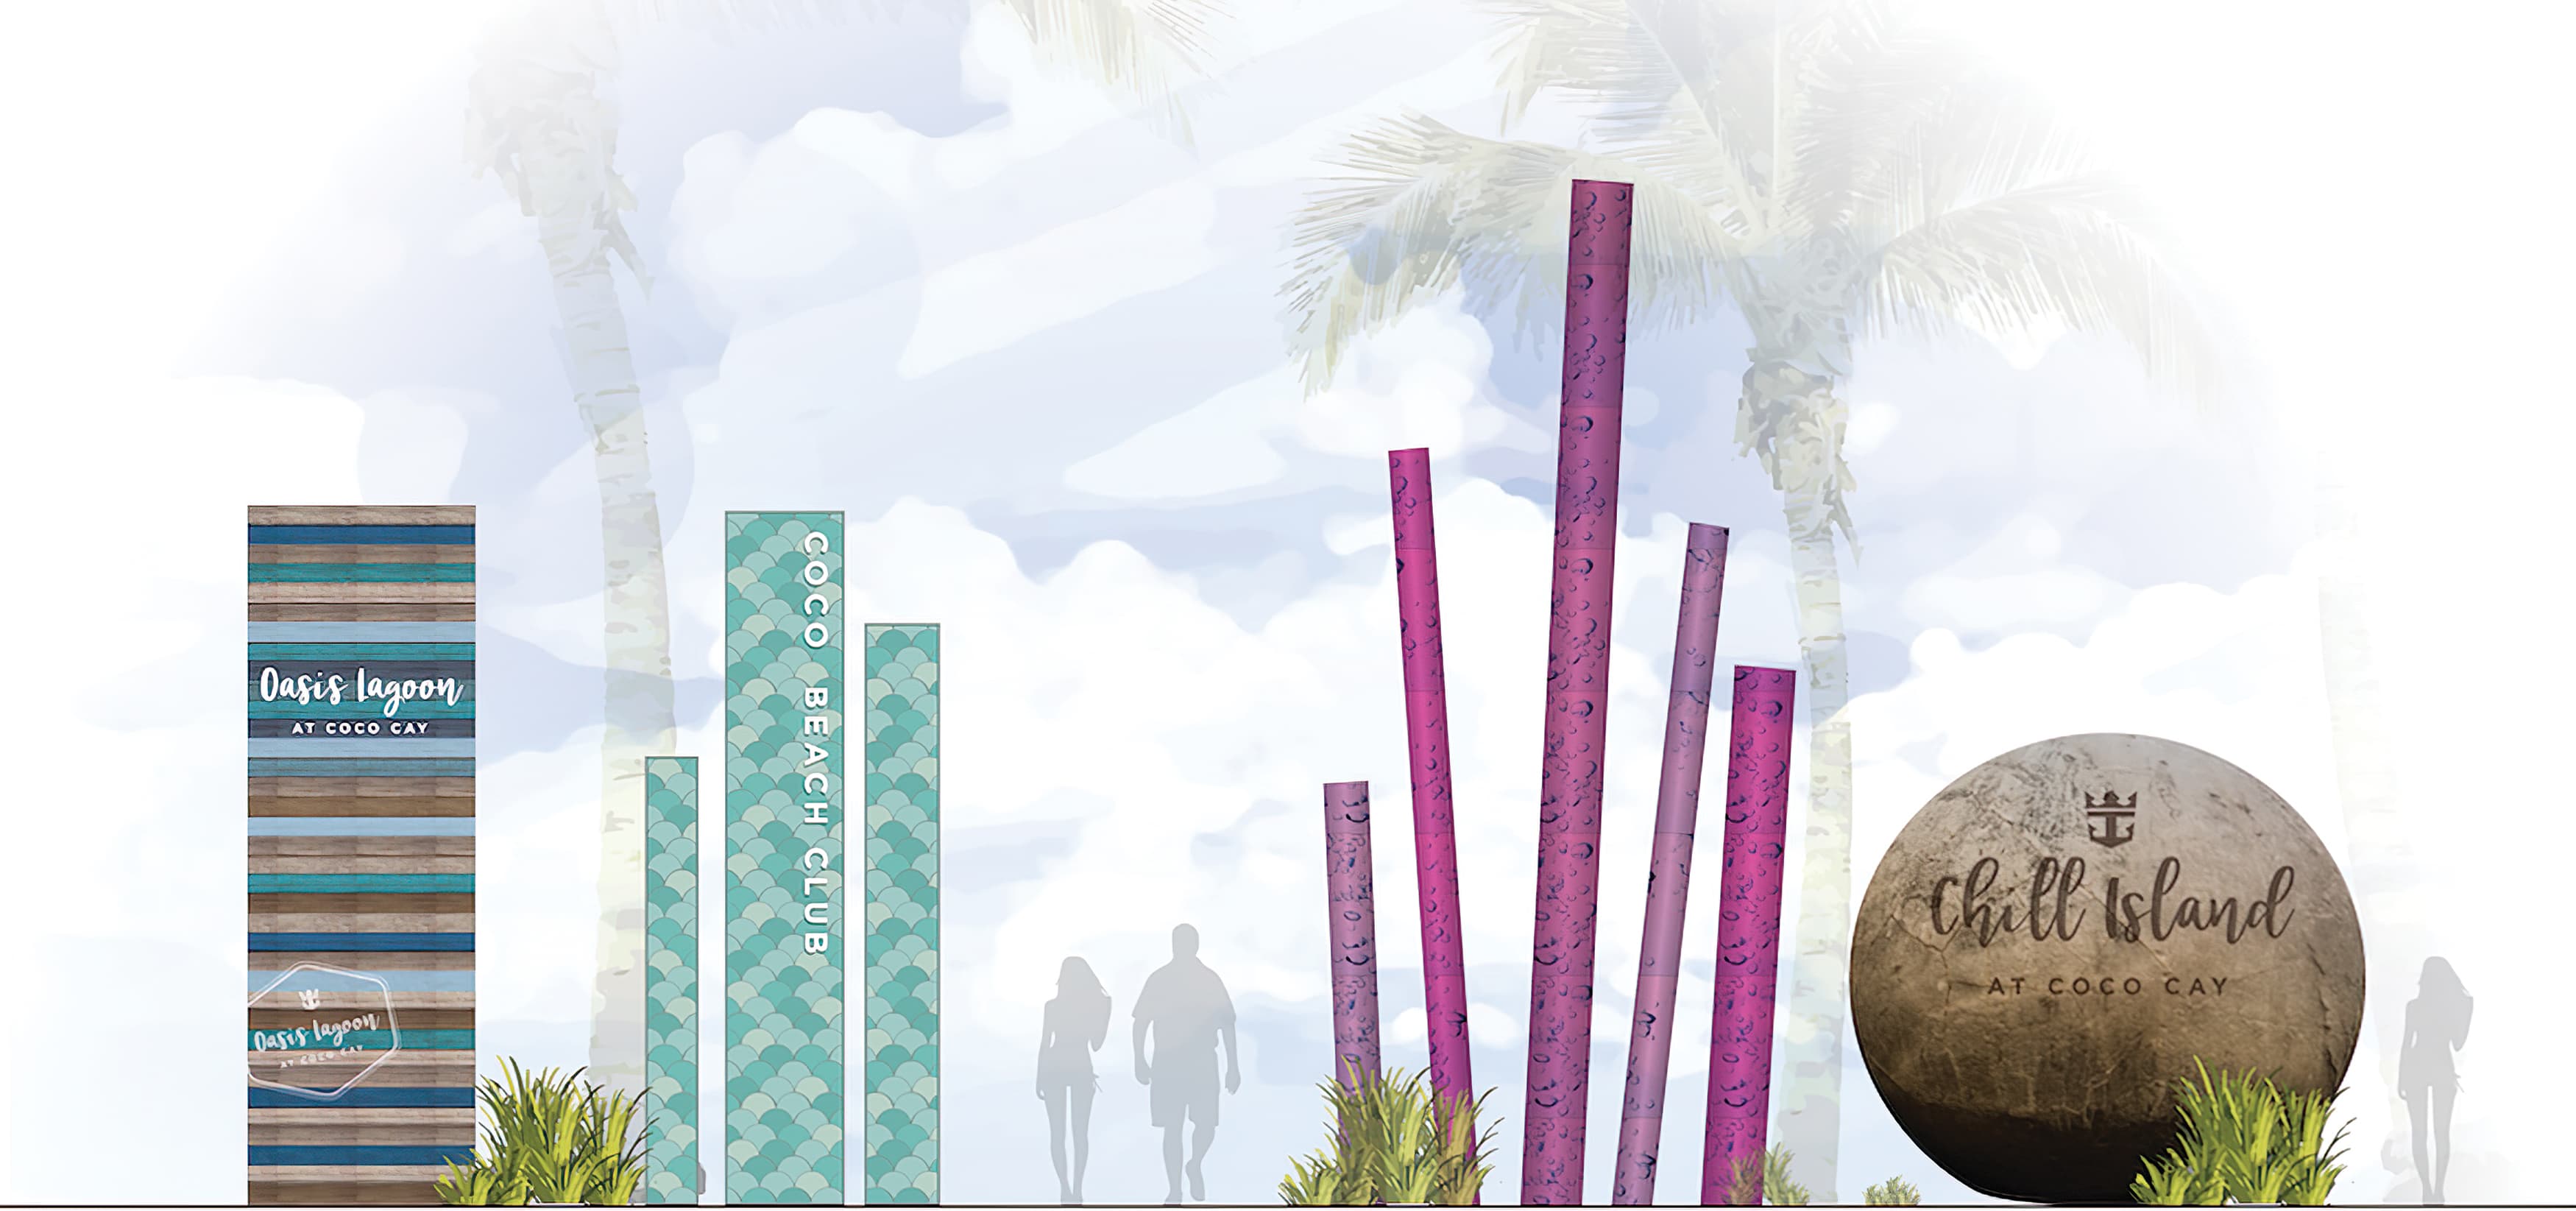 RSM Design developed a series of sculptural identity and wayfinding pieces for Coco Cay, an island in the Bahamas owned by Royal Caribbean.